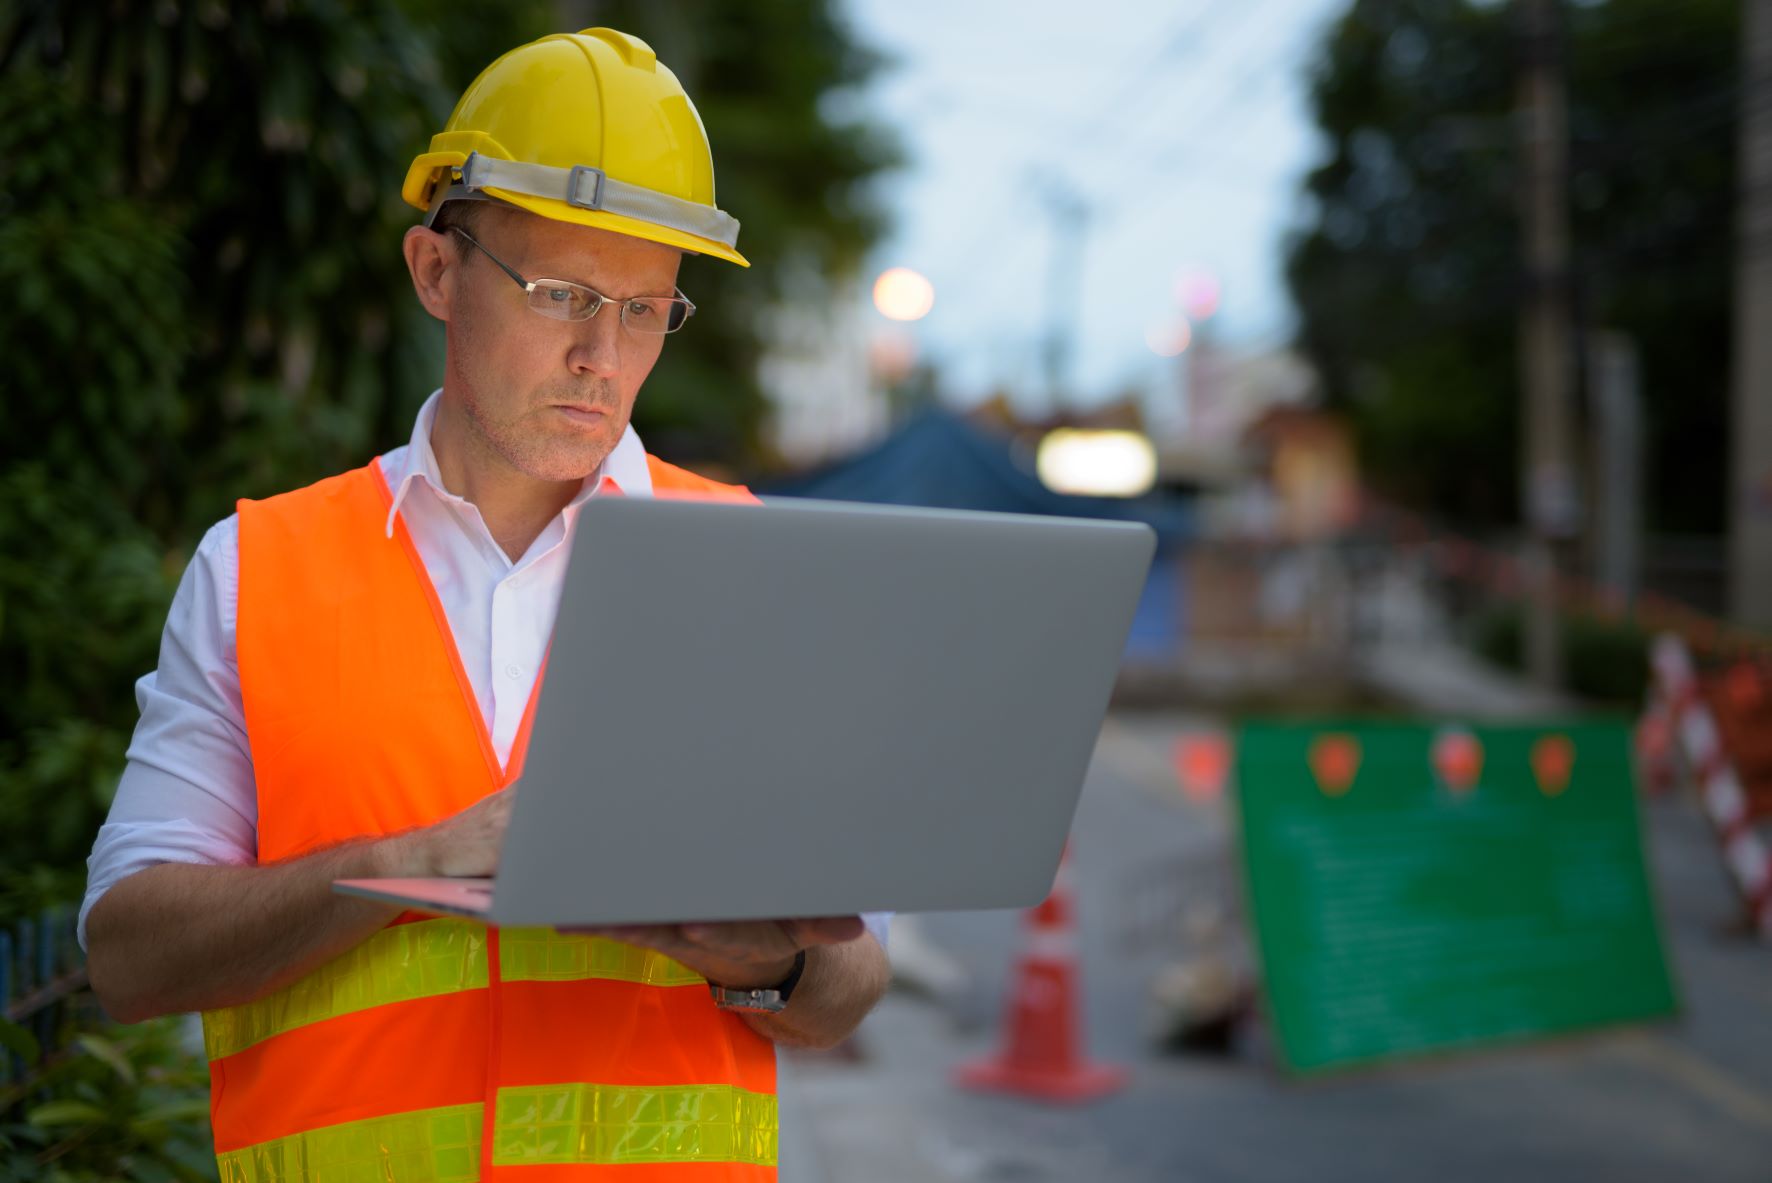 10 Important Features Your Construction Company Website Should Have